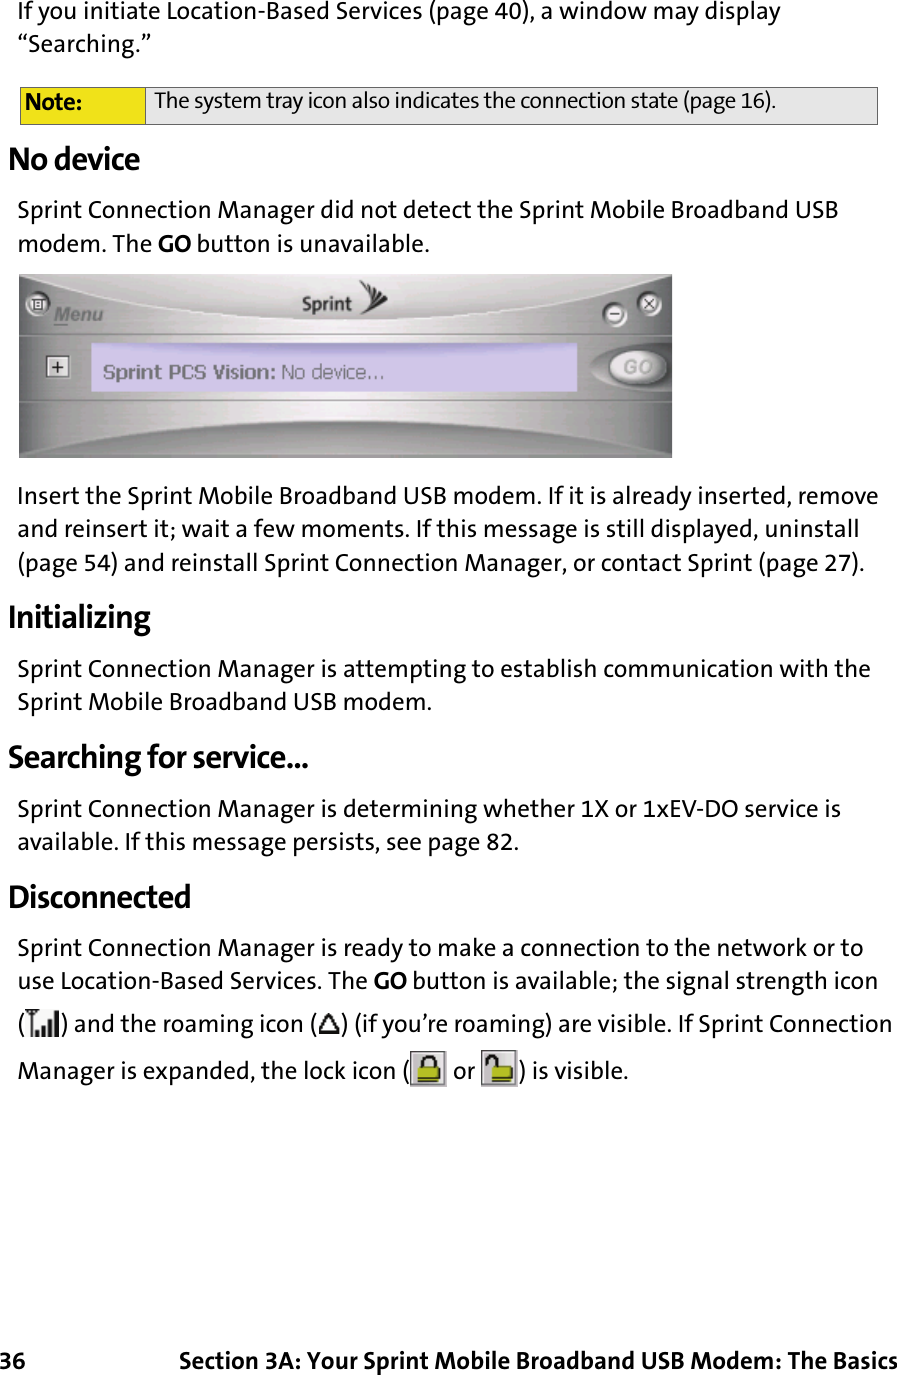 36 Section 3A: Your Sprint Mobile Broadband USB Modem: The BasicsIf you initiate Location-Based Services (page 40), a window may display “Searching.”No deviceSprint Connection Manager did not detect the Sprint Mobile Broadband USB modem. The GO button is unavailable.Insert the Sprint Mobile Broadband USB modem. If it is already inserted, remove and reinsert it; wait a few moments. If this message is still displayed, uninstall (page 54) and reinstall Sprint Connection Manager, or contact Sprint (page 27).InitializingSprint Connection Manager is attempting to establish communication with the Sprint Mobile Broadband USB modem.Searching for service...Sprint Connection Manager is determining whether 1X or 1xEV-DO service is available. If this message persists, see page 82.DisconnectedSprint Connection Manager is ready to make a connection to the network or to use Location-Based Services. The GO button is available; the signal strength icon ( ) and the roaming icon ( ) (if you’re roaming) are visible. If Sprint Connection Manager is expanded, the lock icon (  or  ) is visible.Note: The system tray icon also indicates the connection state (page 16).